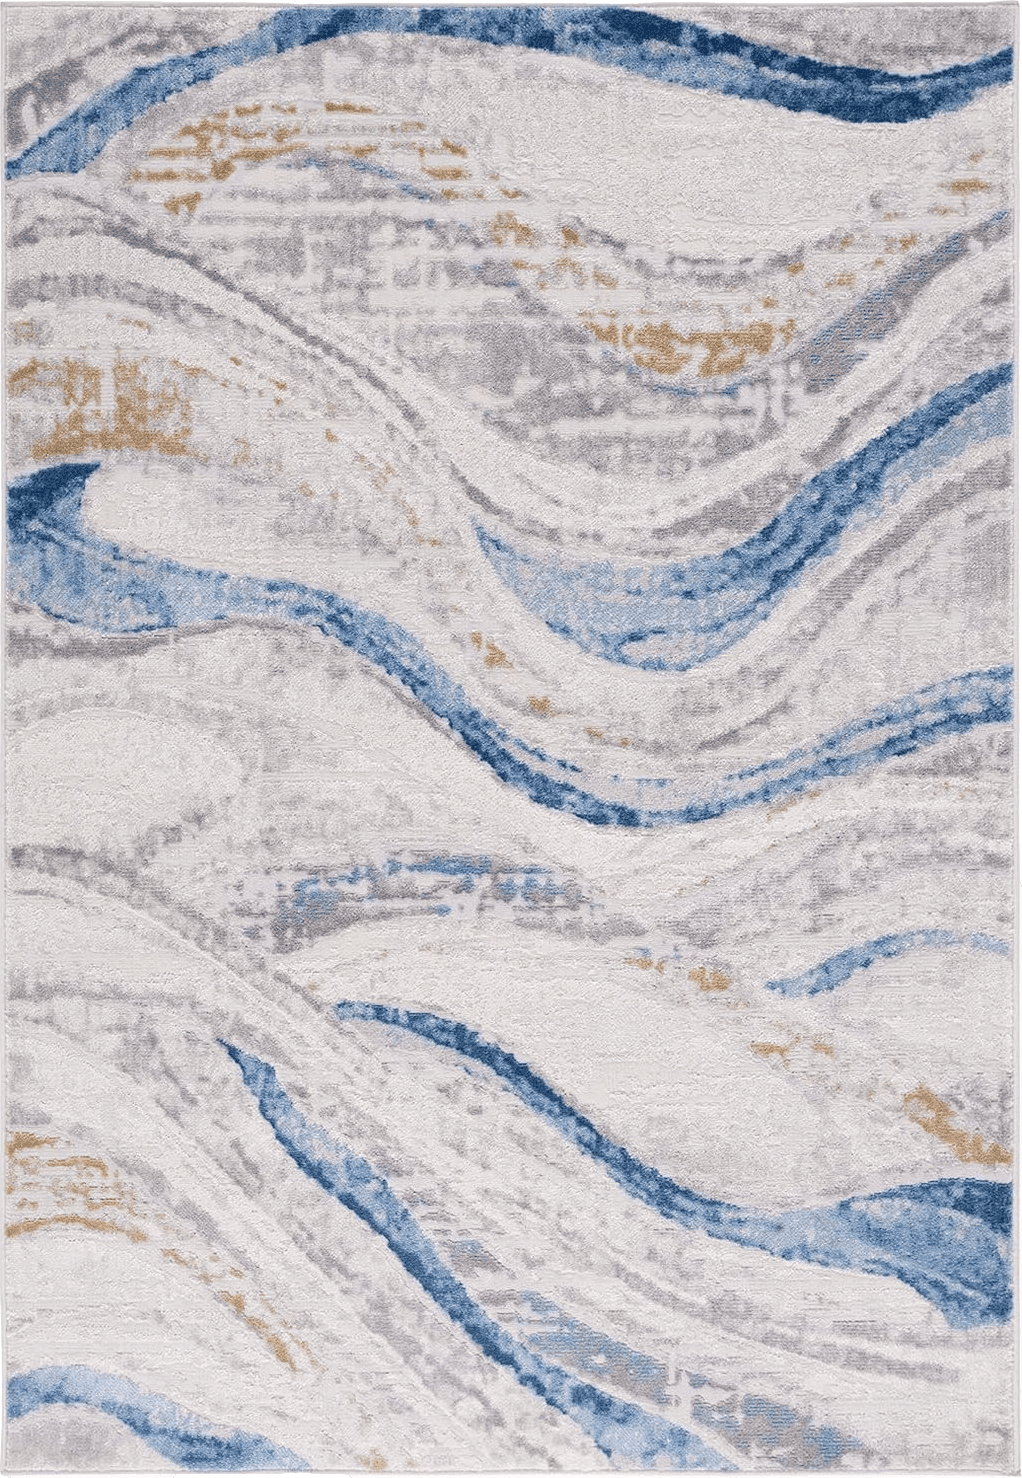 Area Blue Safavieh Palma Collection Area Rug - 9' x 12', Beige & Light Blue, Modern Abstract Design, Non-Shedding & Easy Care, Ideal for High Traffic Areas in Living Room, Bedroom (PAM334A)